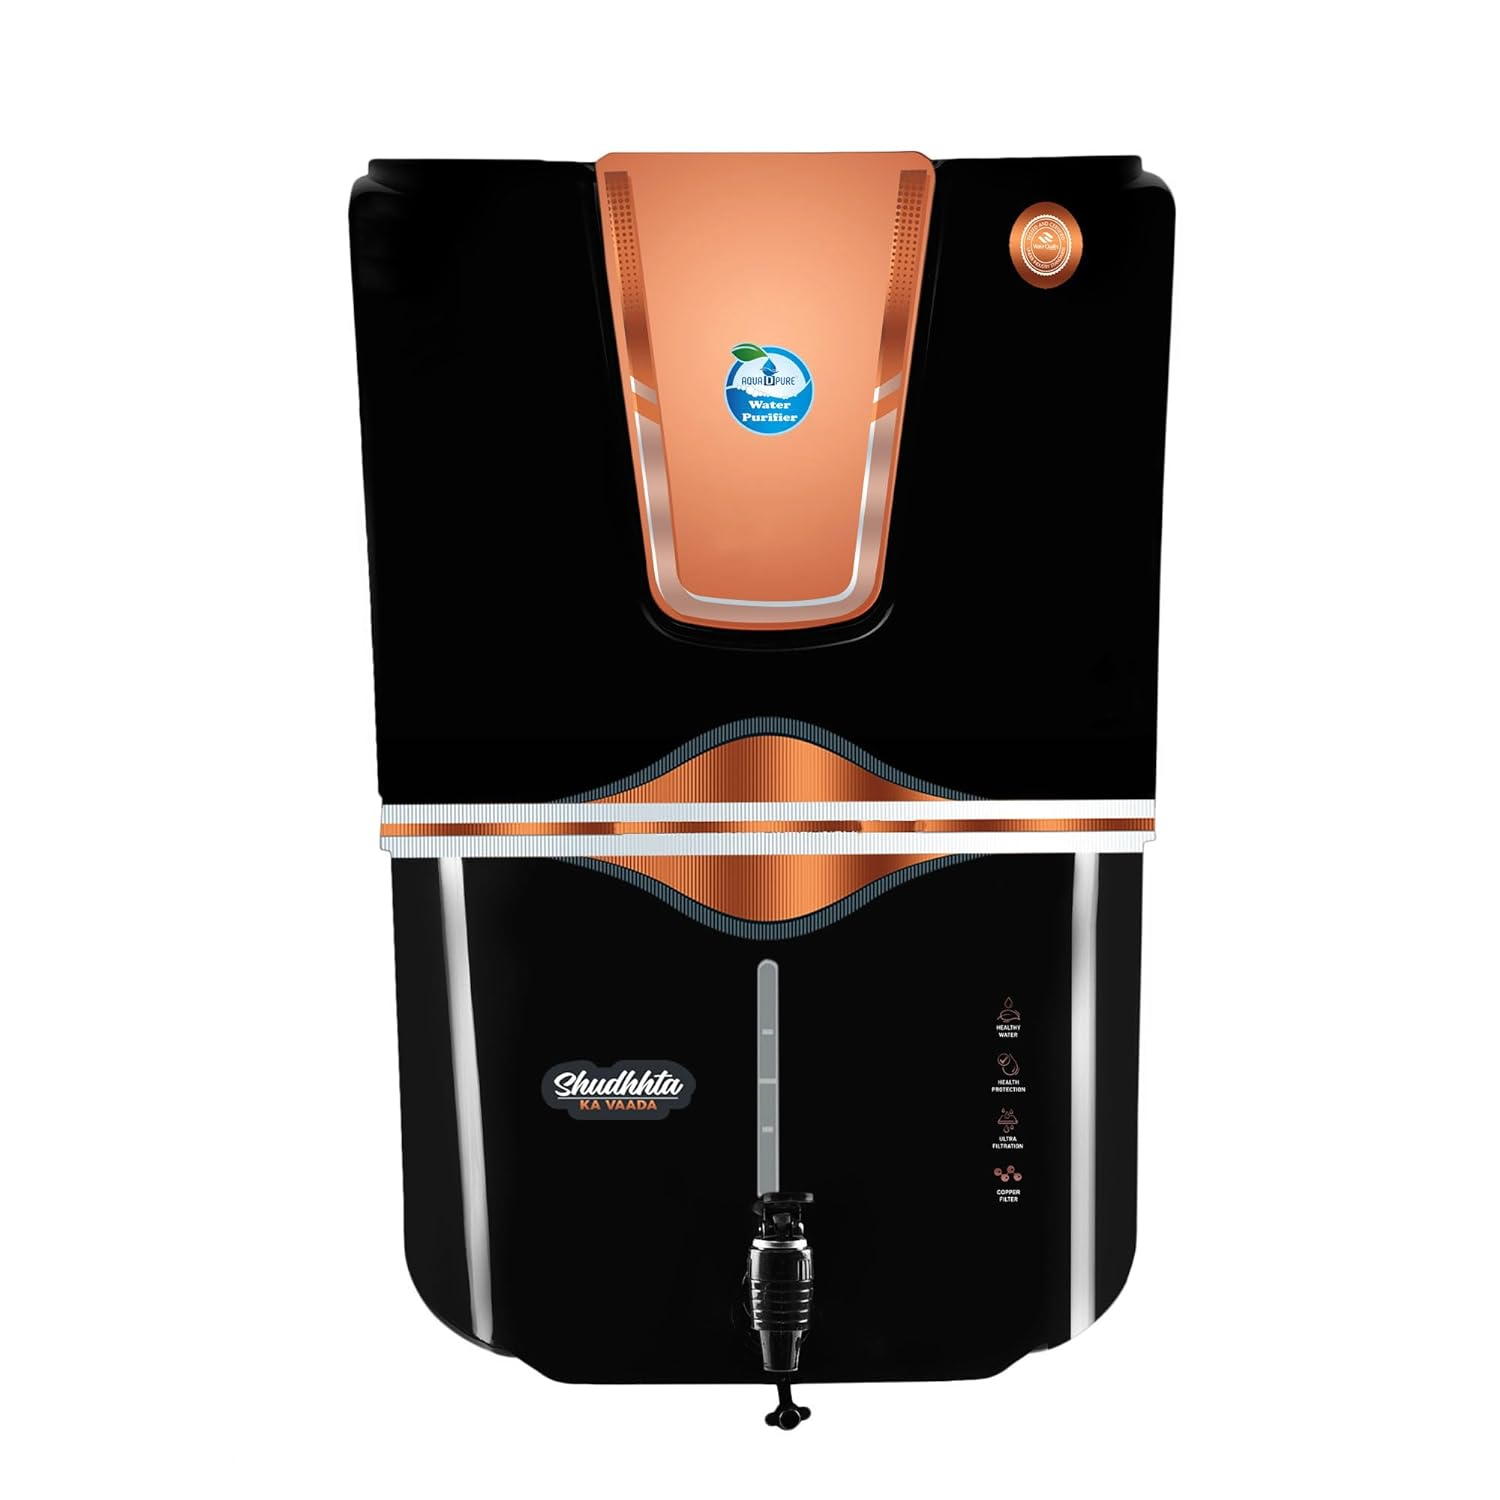 AQUA D PURE Copper RO WatePurifier with UV, UF and TDS Controller | 12Liter | Fully Automatic Function and Best For Home and